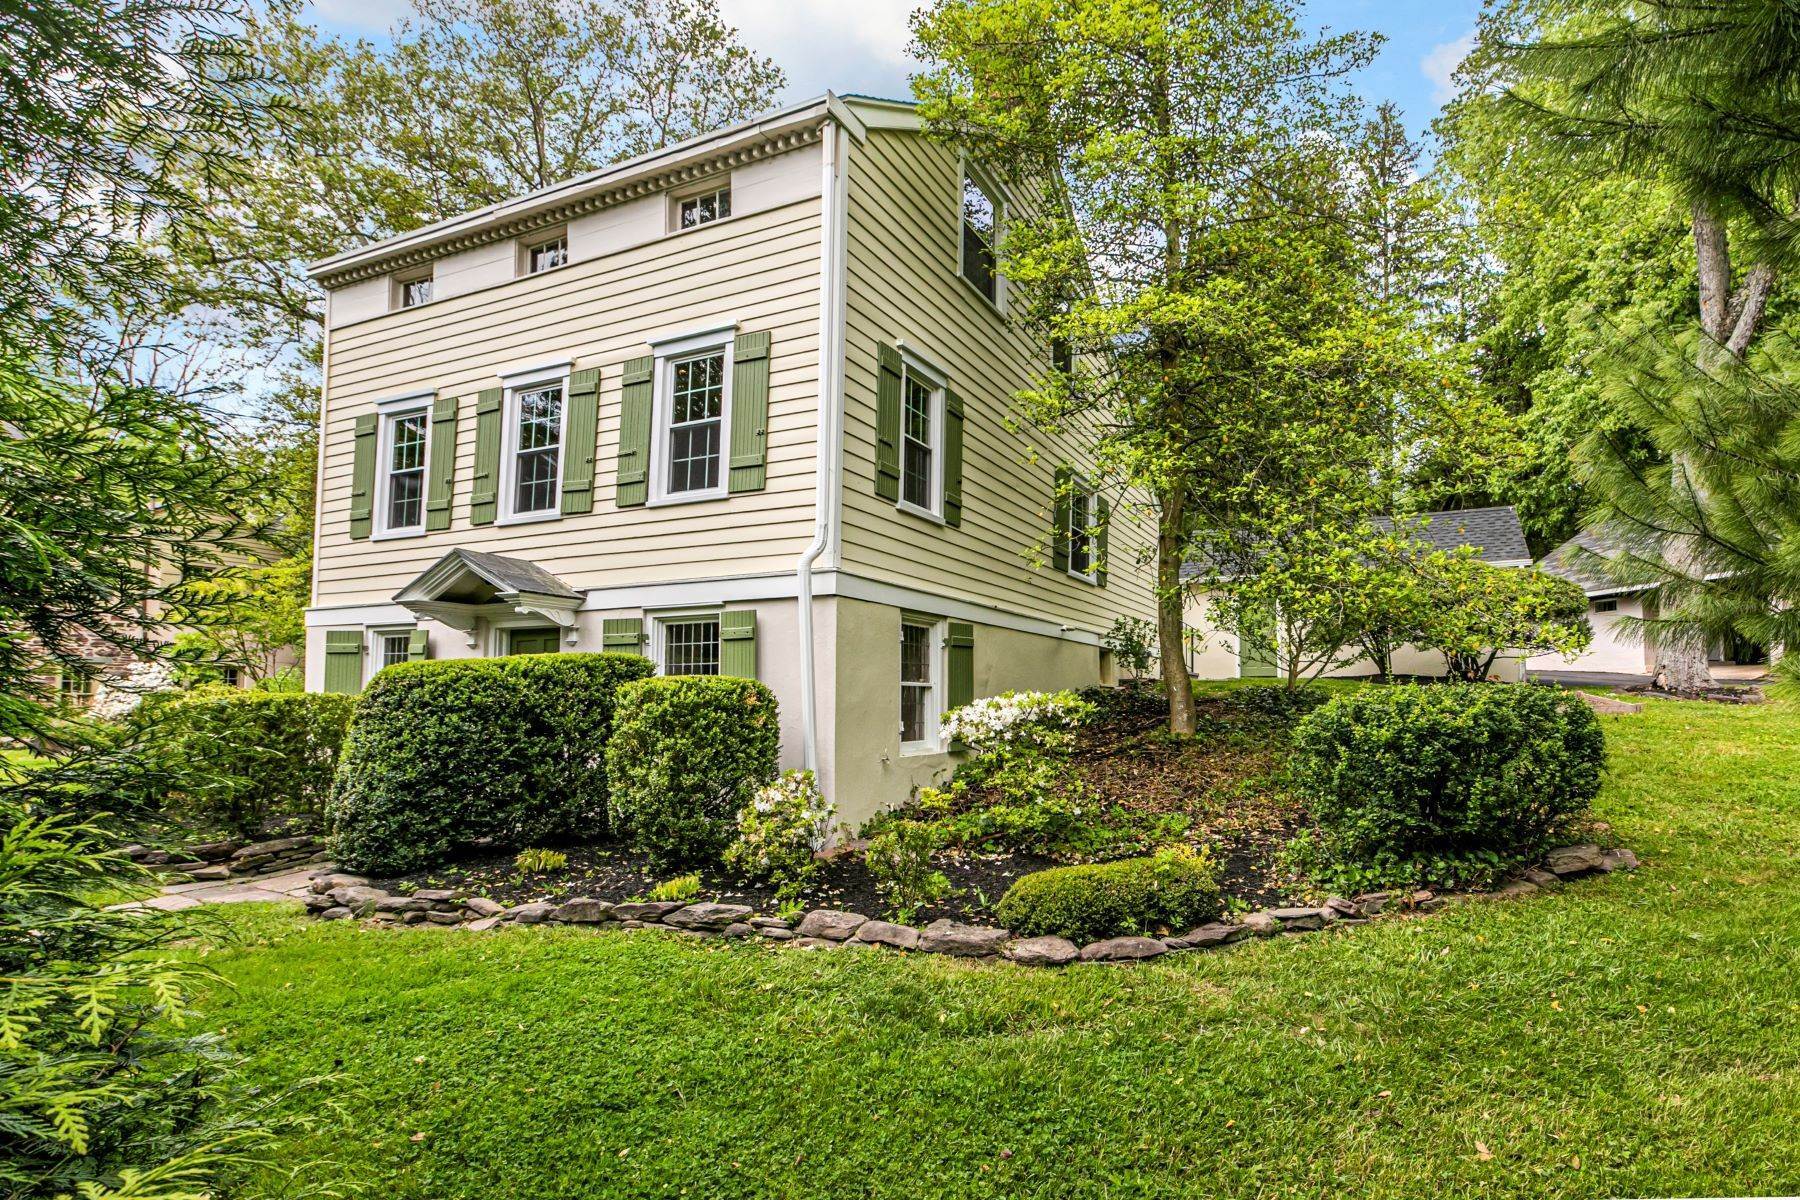 44. Single Family Homes for Sale at Modern Functionality in a Character-filled Home 92 Winant Road, Princeton, New Jersey 08540 United States